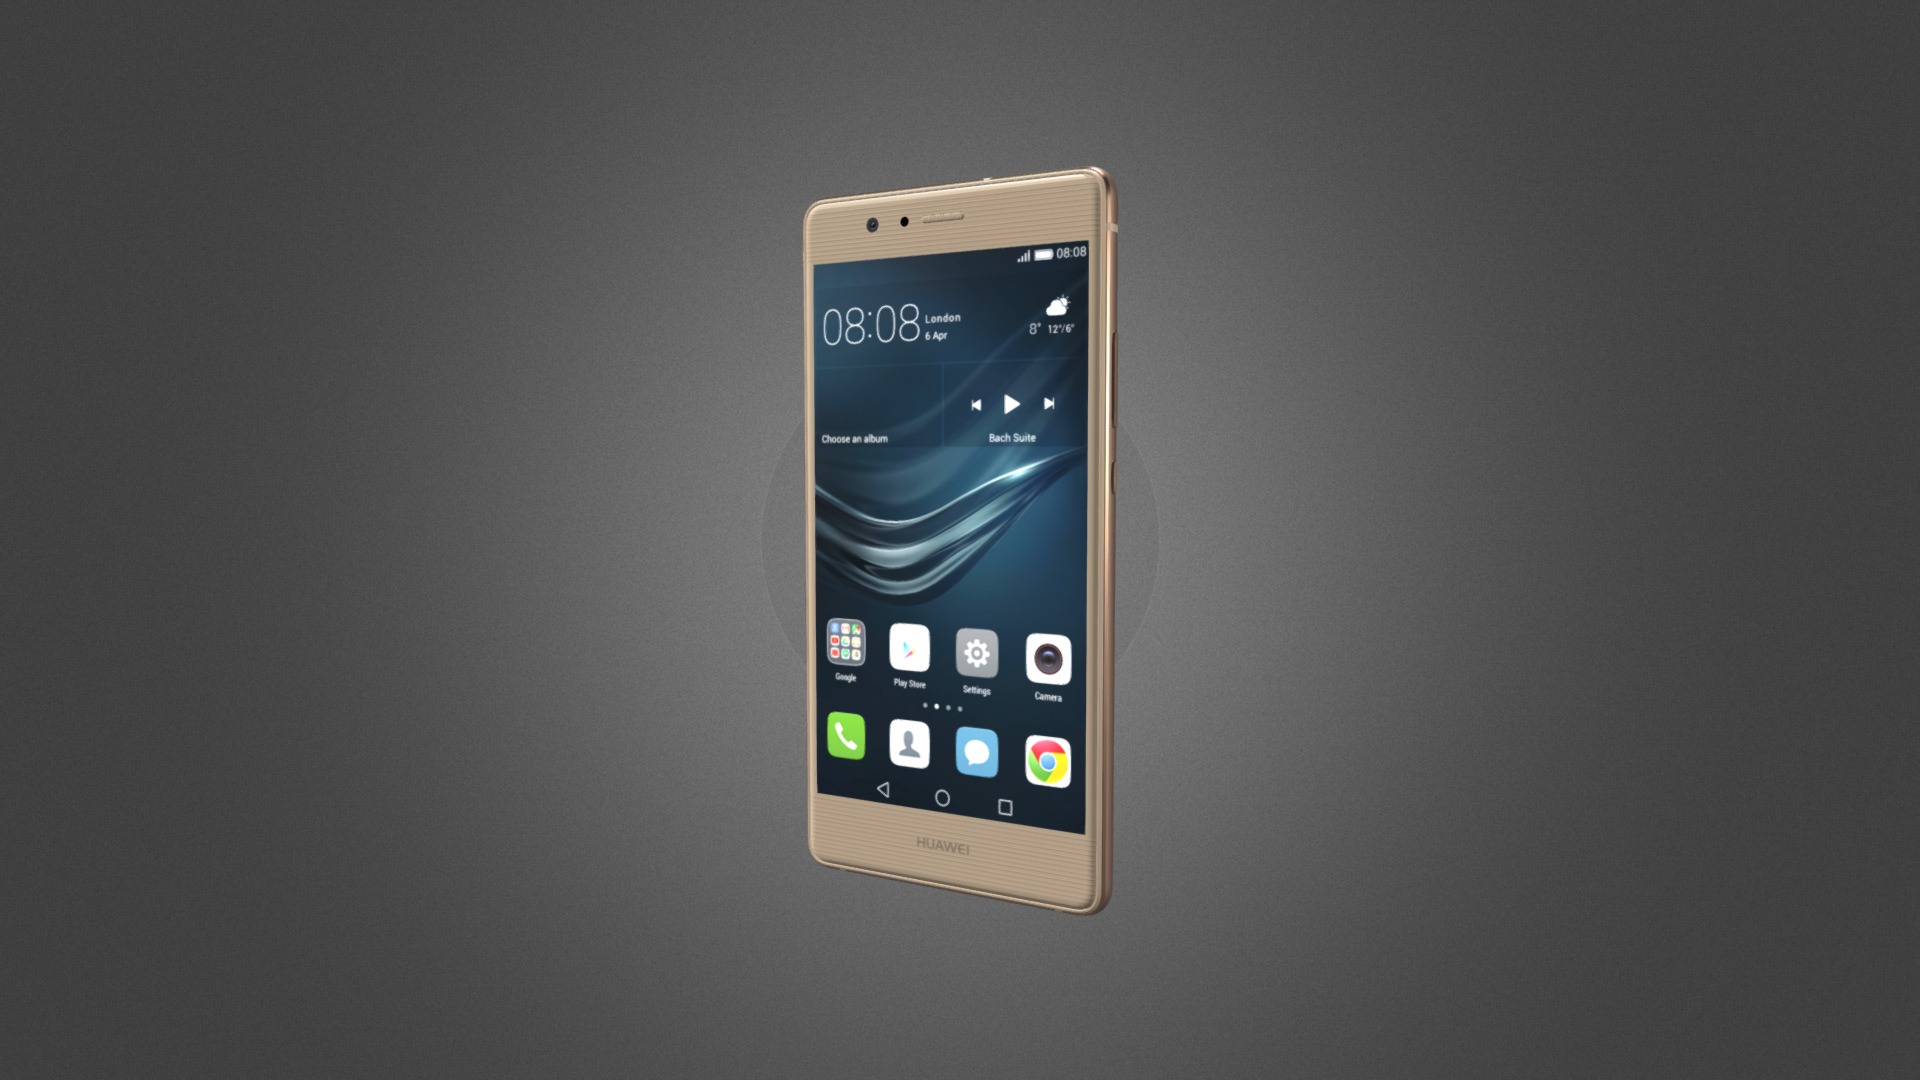 3D model Huawei P9 Lite for Element 3D - This is a 3D model of the Huawei P9 Lite for Element 3D. The 3D model is about a cell phone on a table.